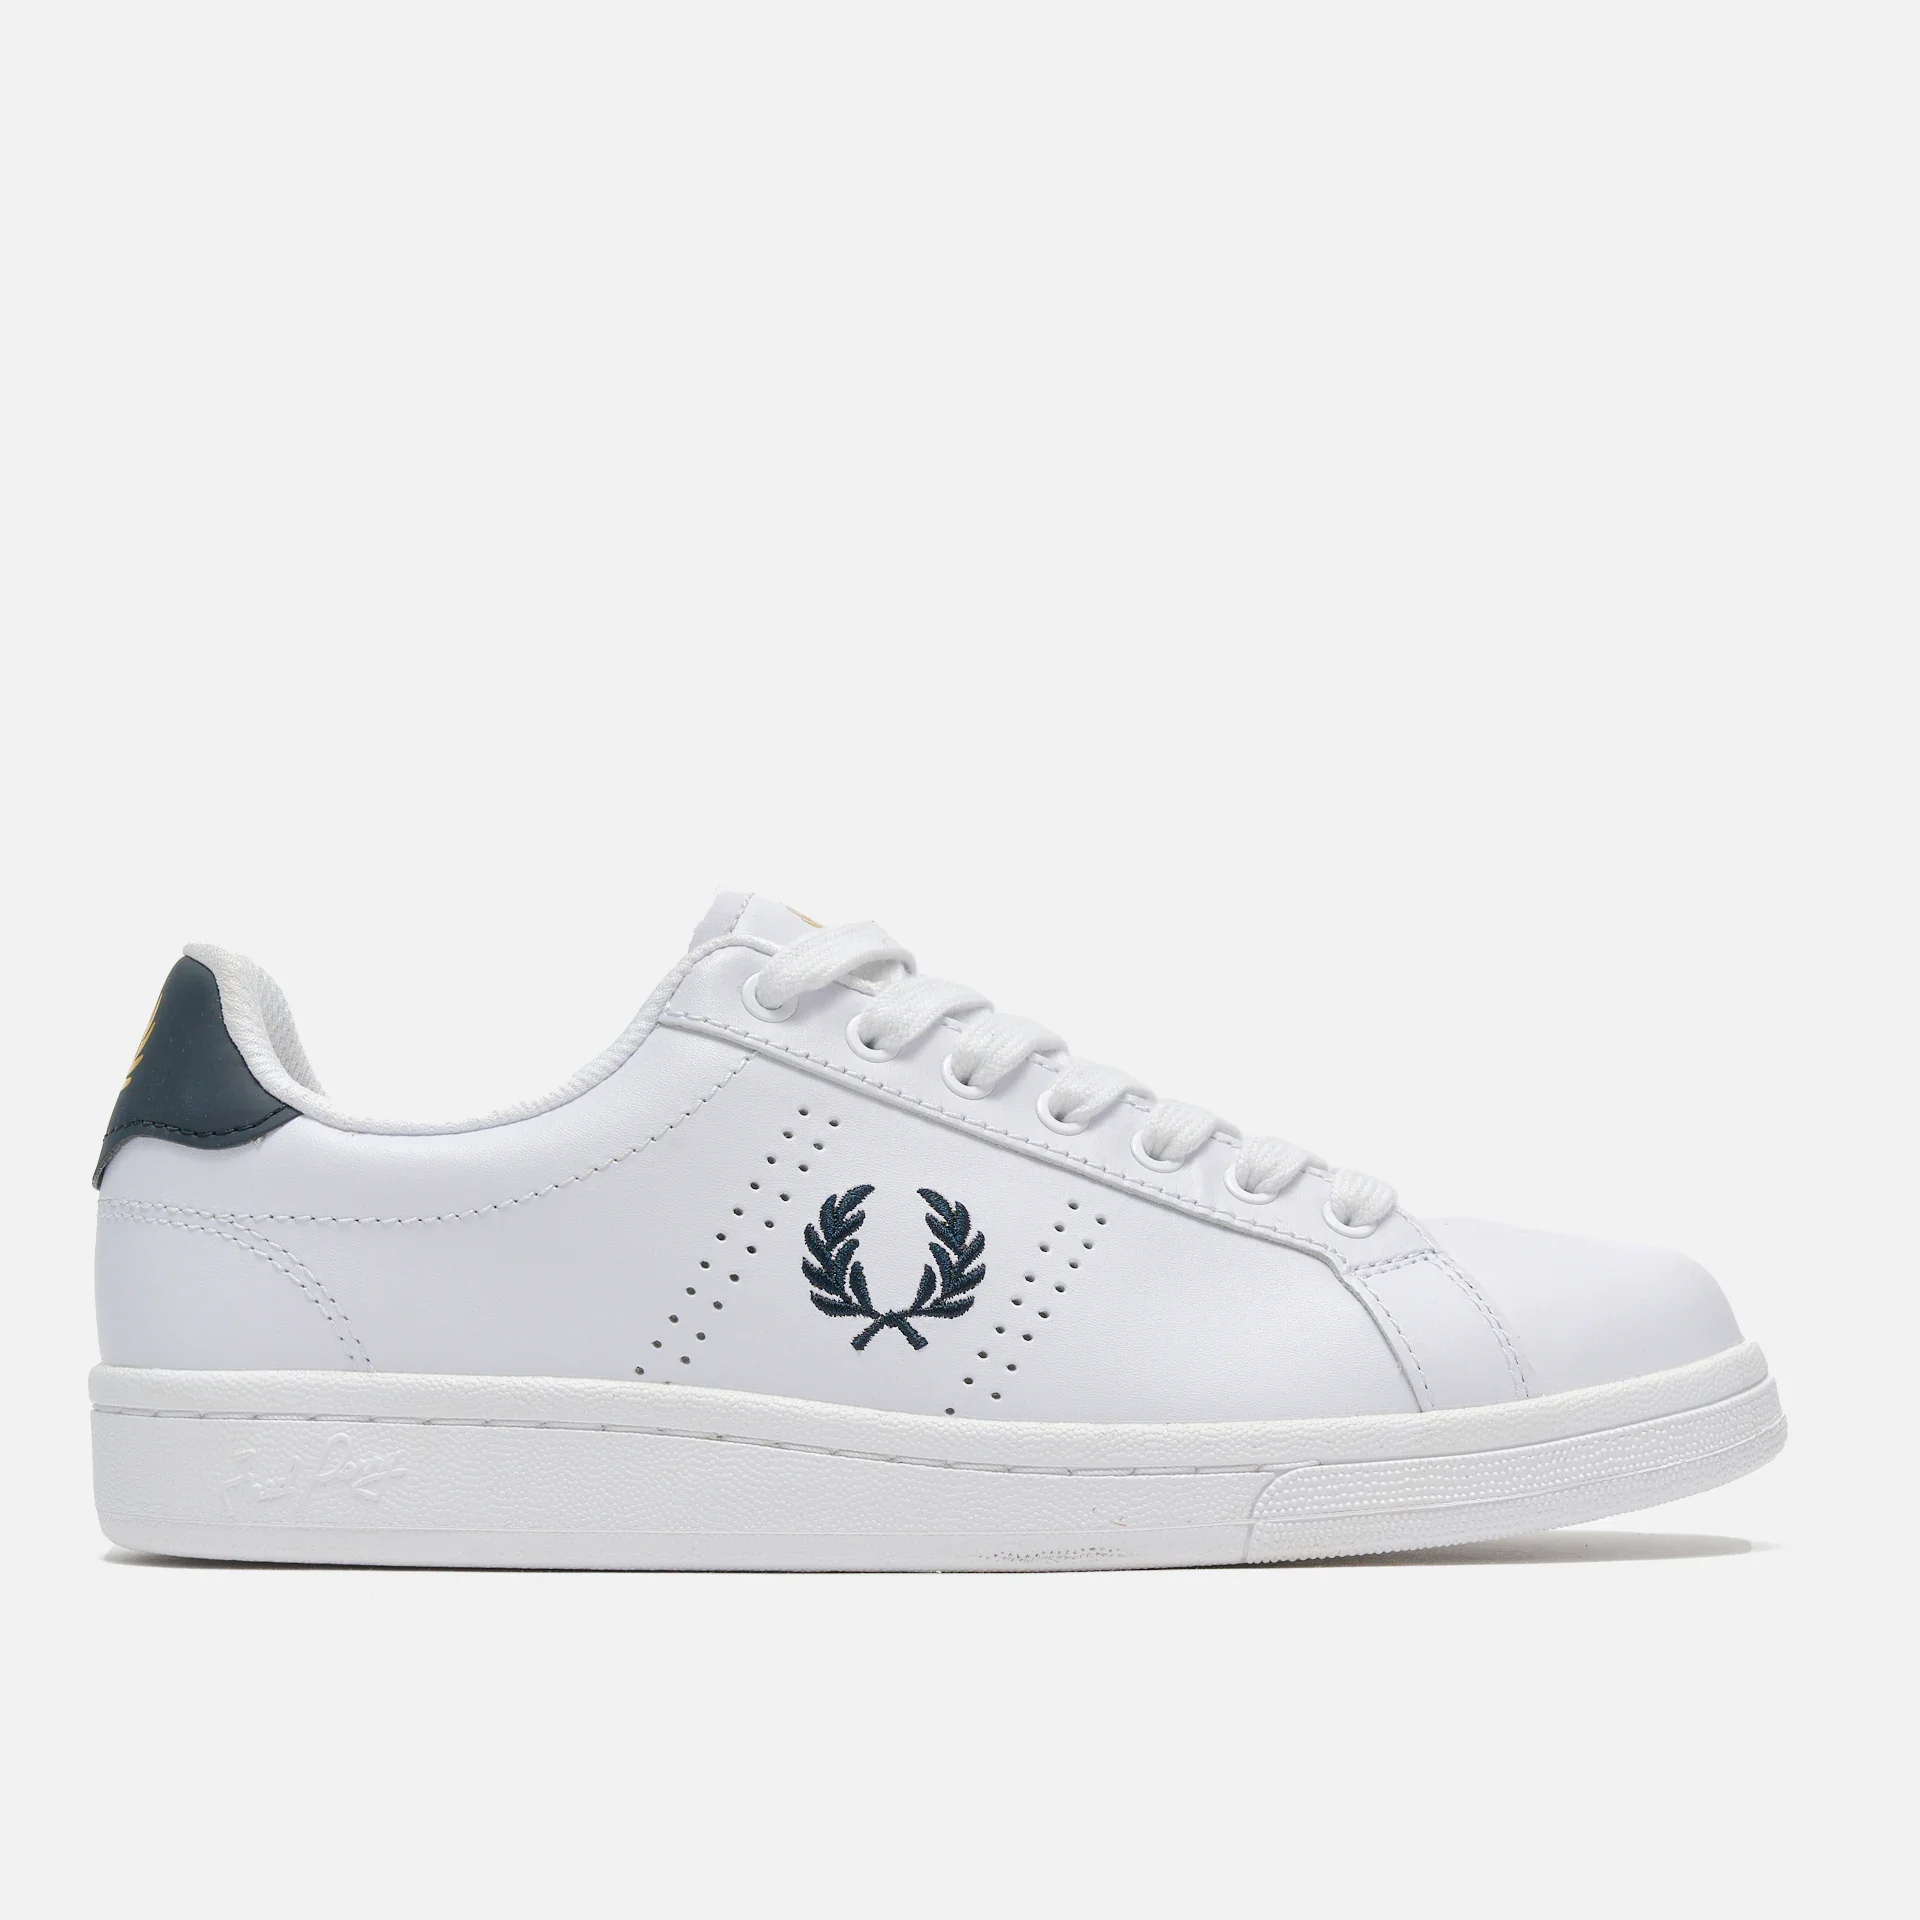 Fred Perry B721 Leather Sneakers White/Navy